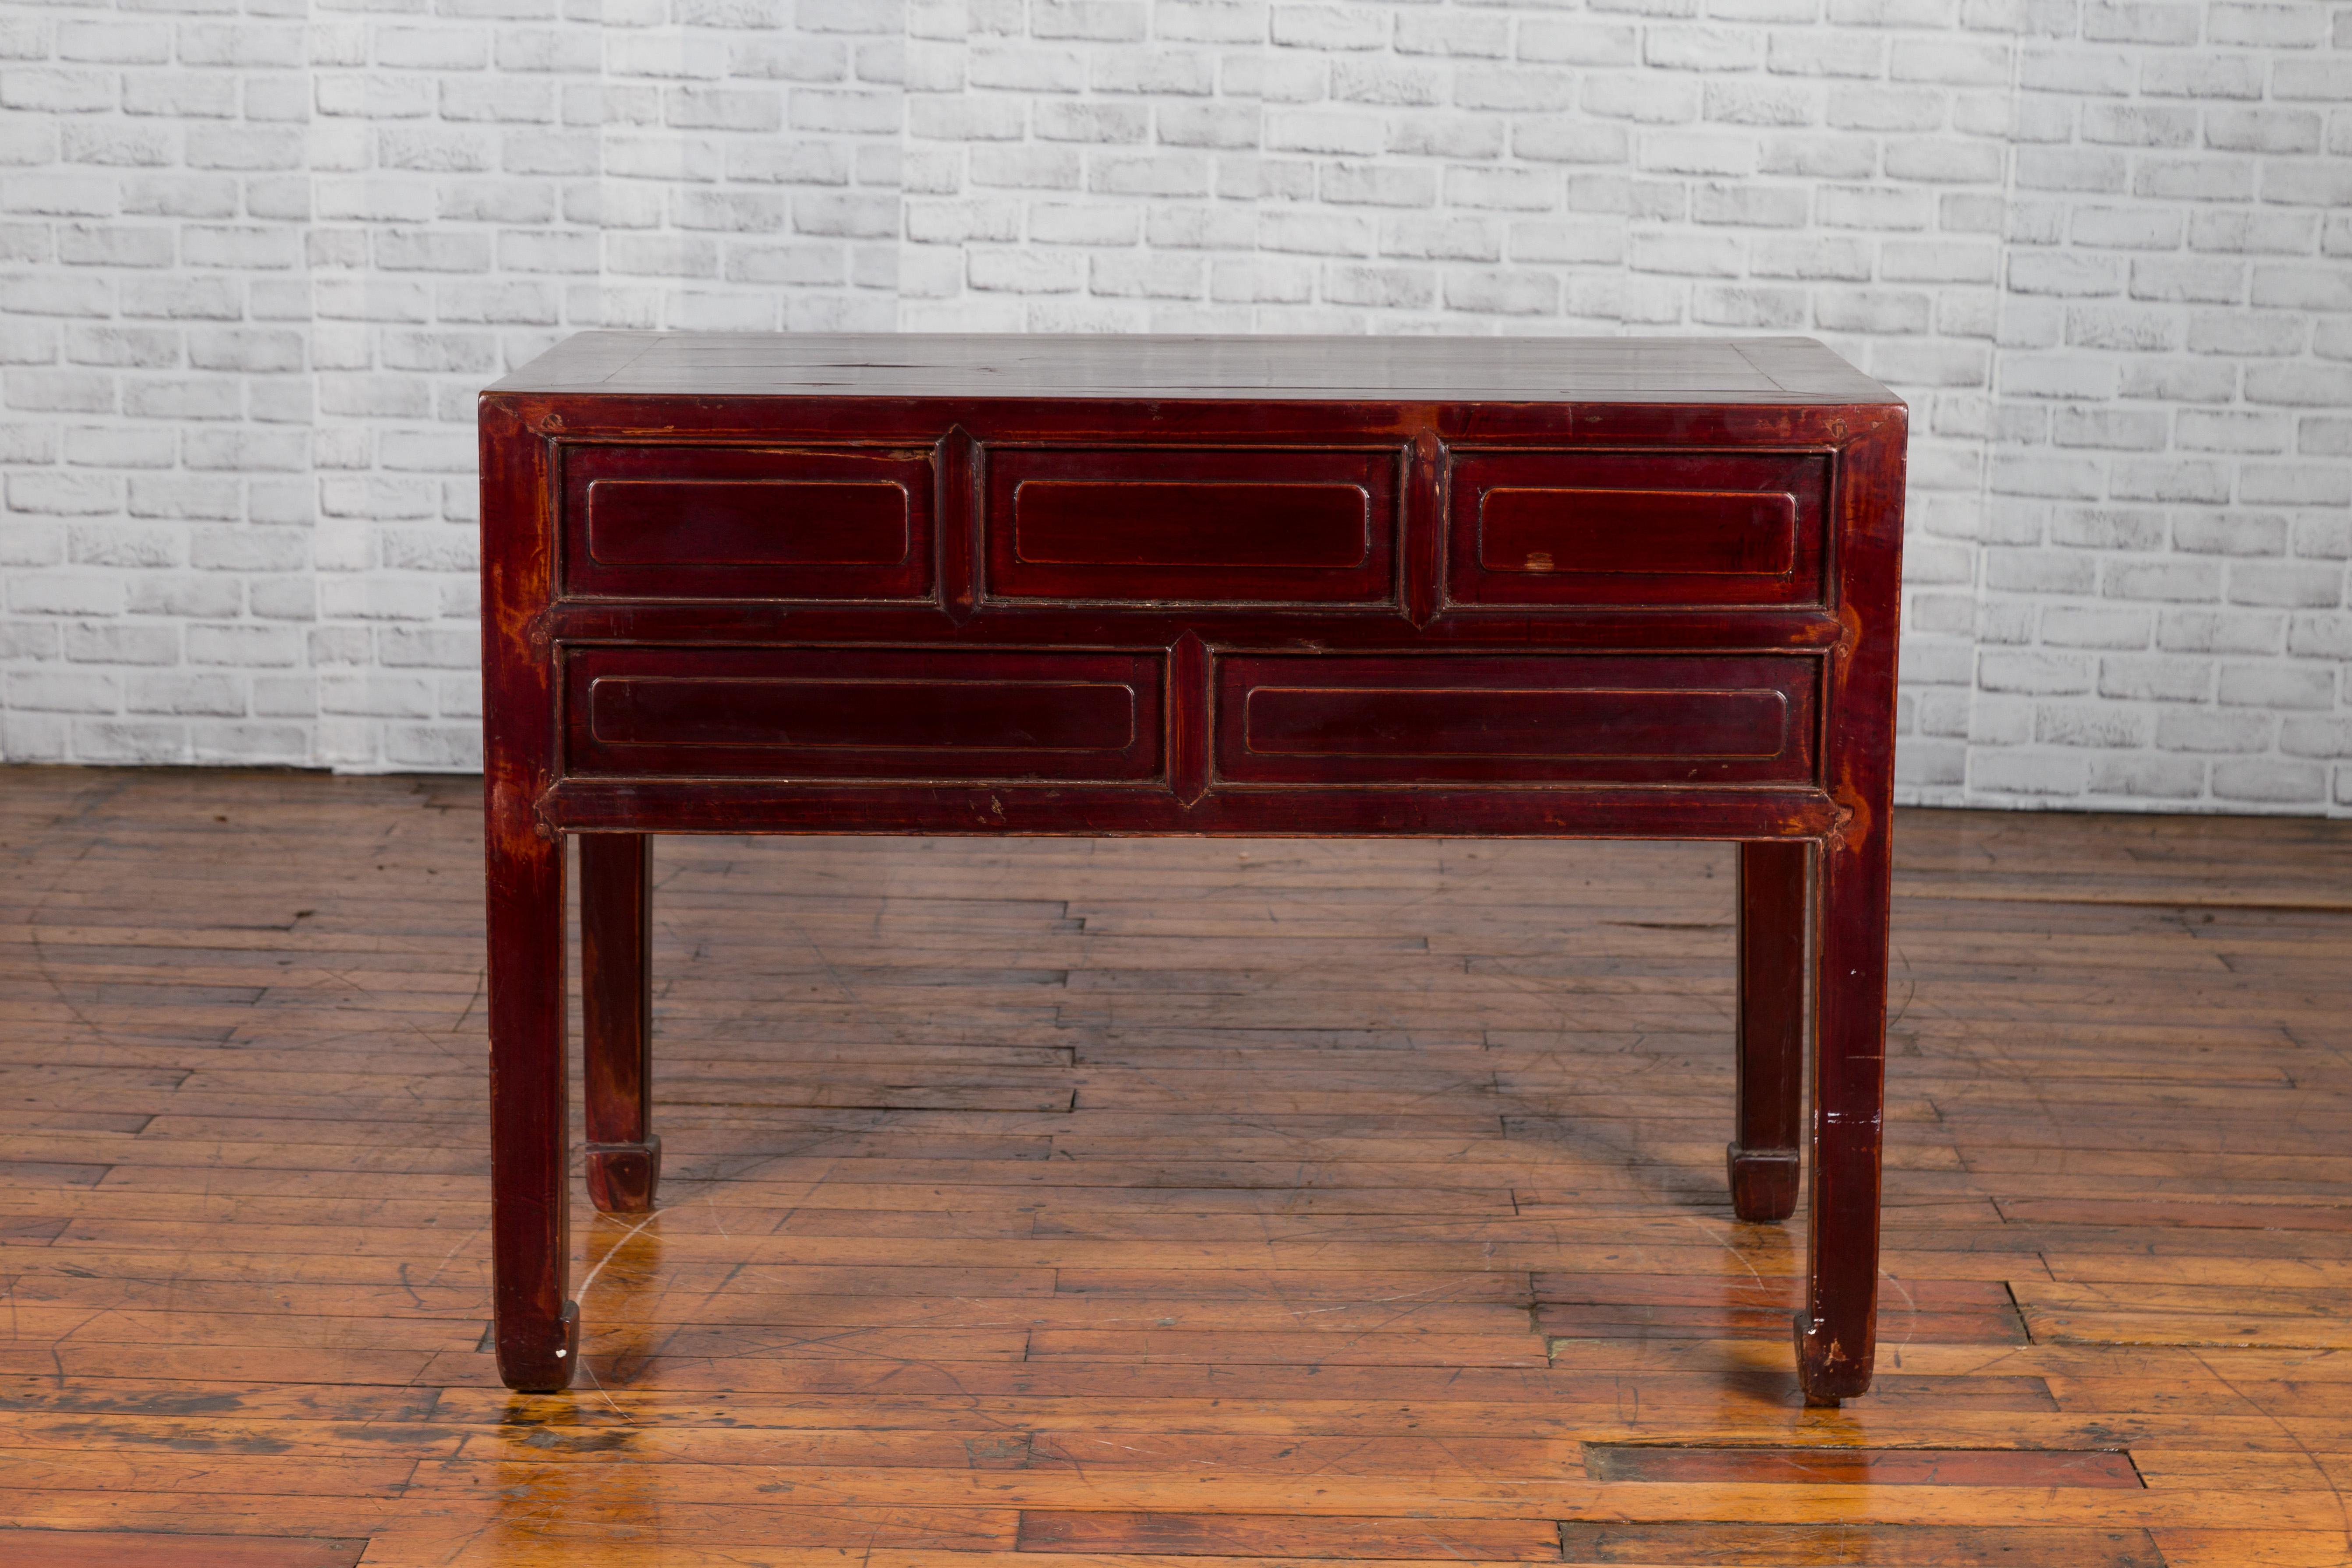 Chinese Antique Console Table with Drawers, Horse Hoof Legs and Dark Red Patina For Sale 8